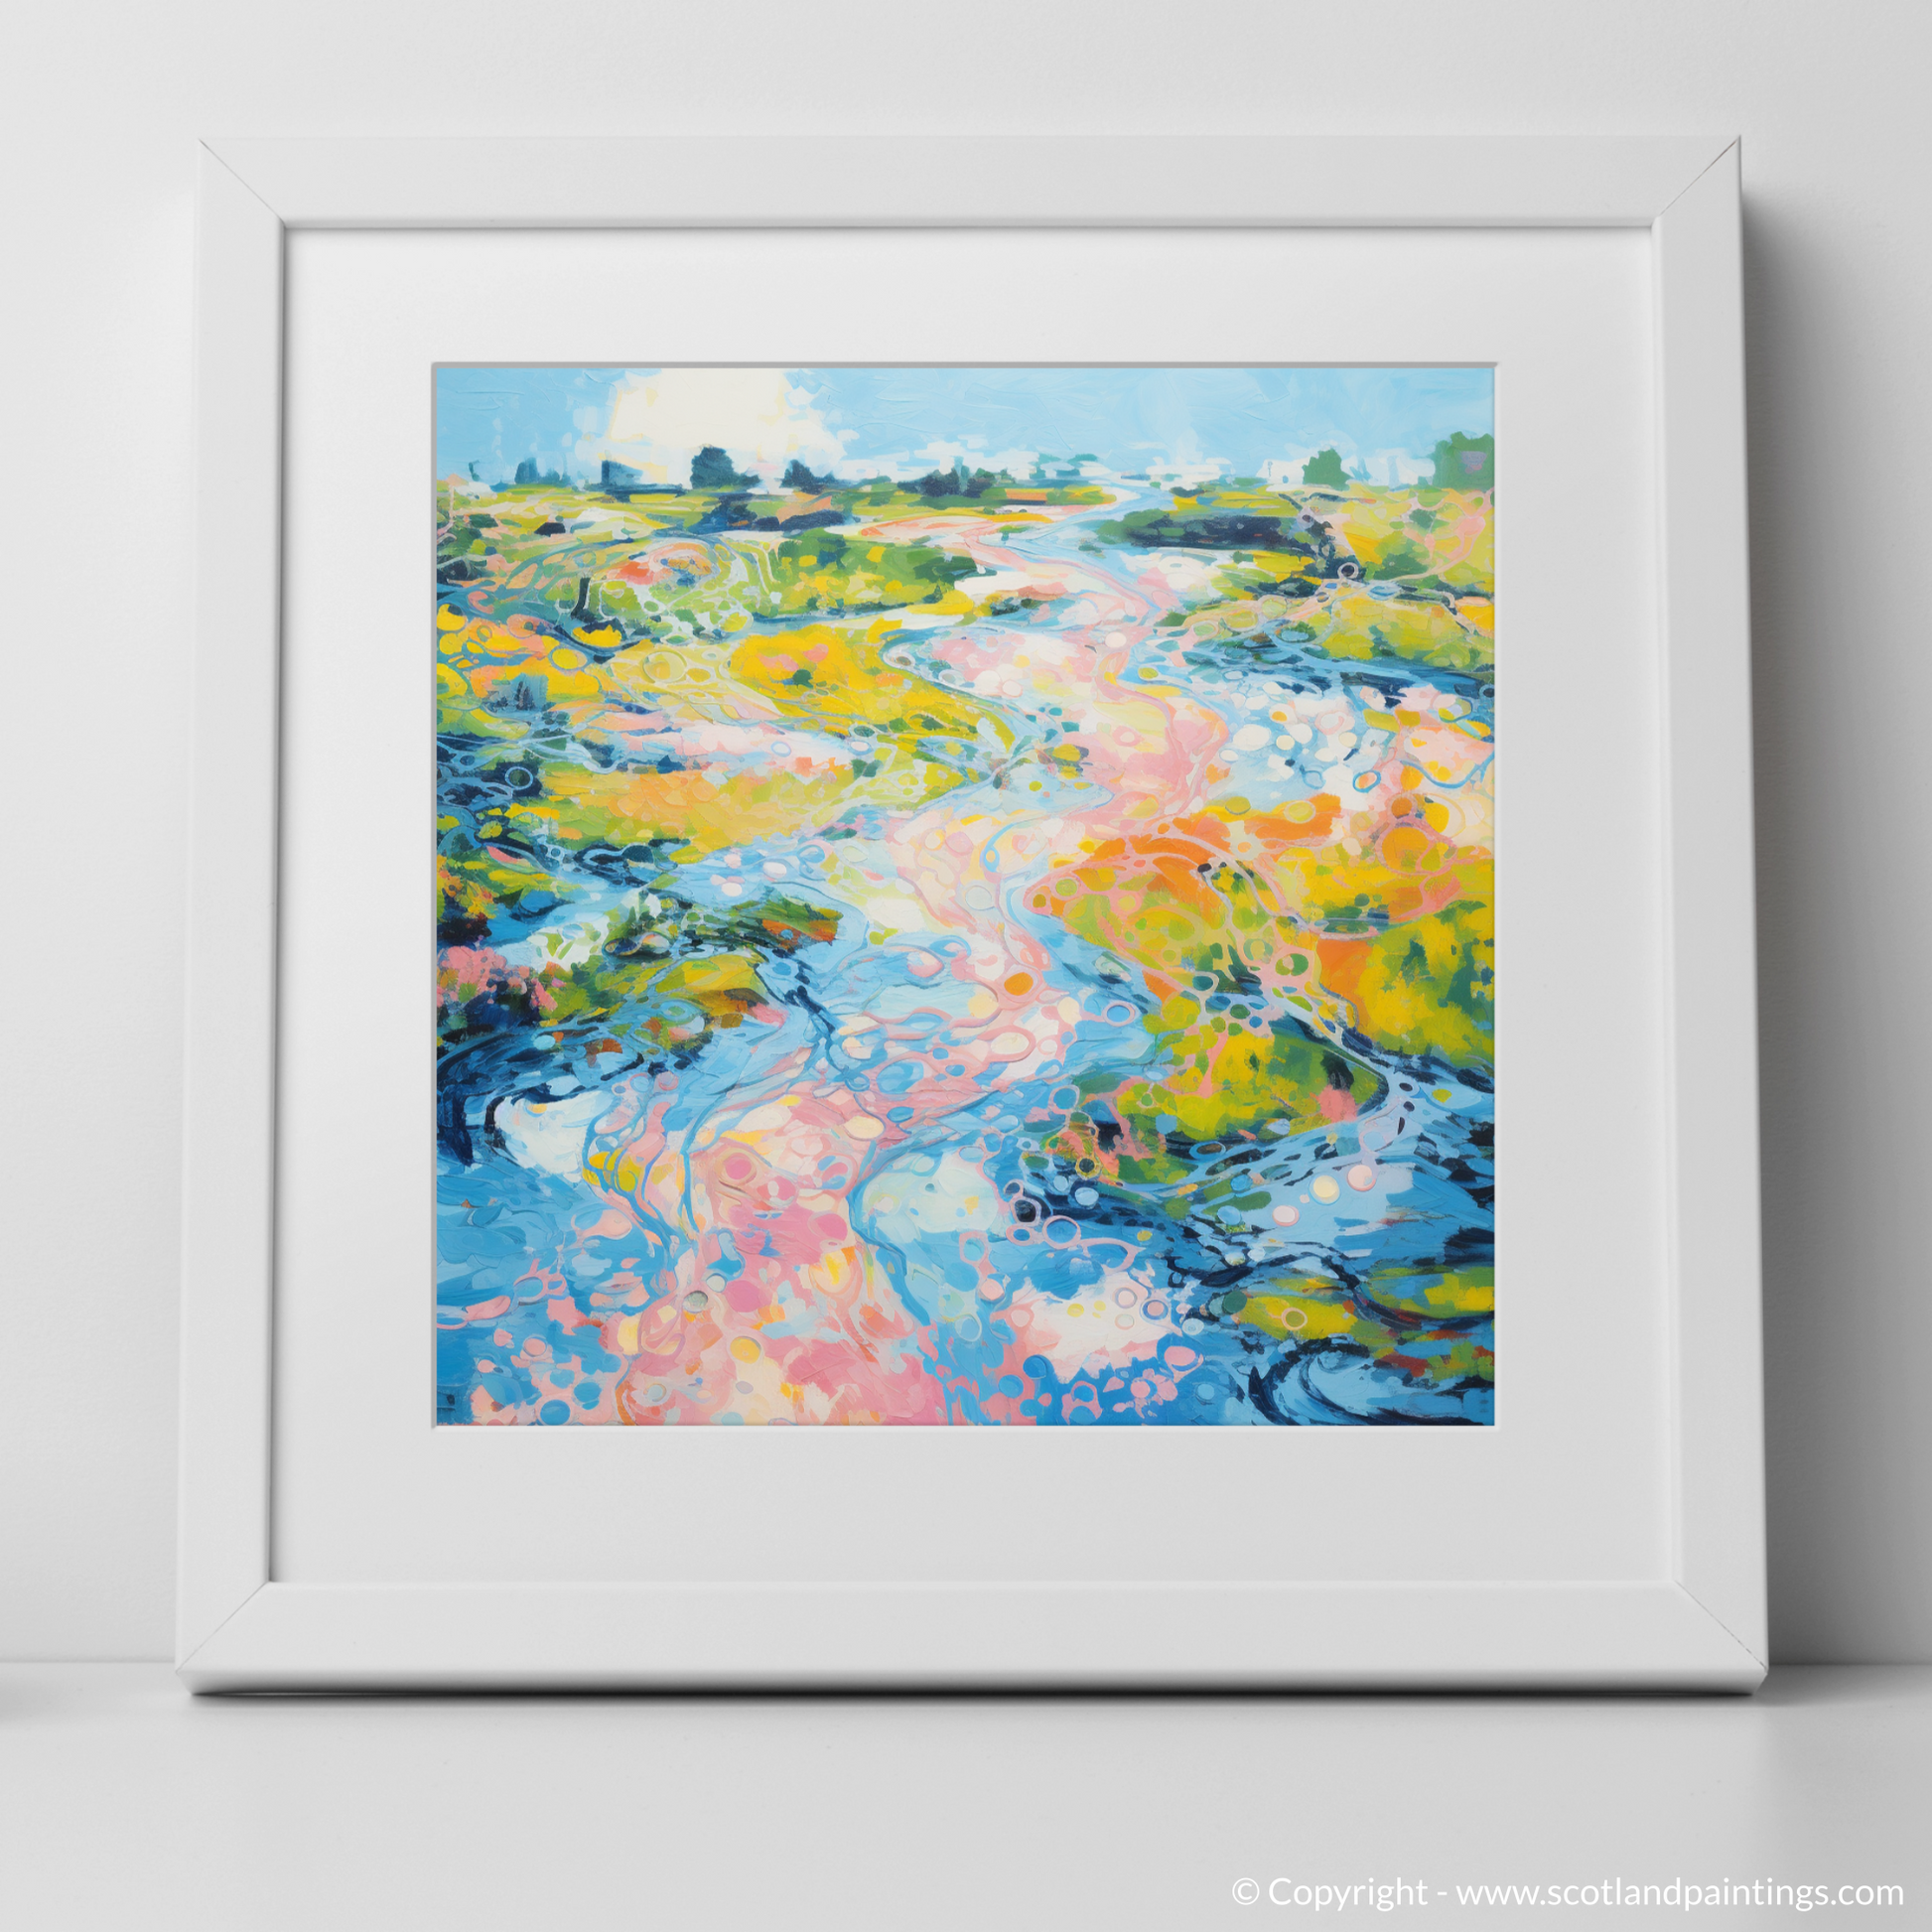 Art Print of River Dee, Aberdeenshire in summer with a white frame